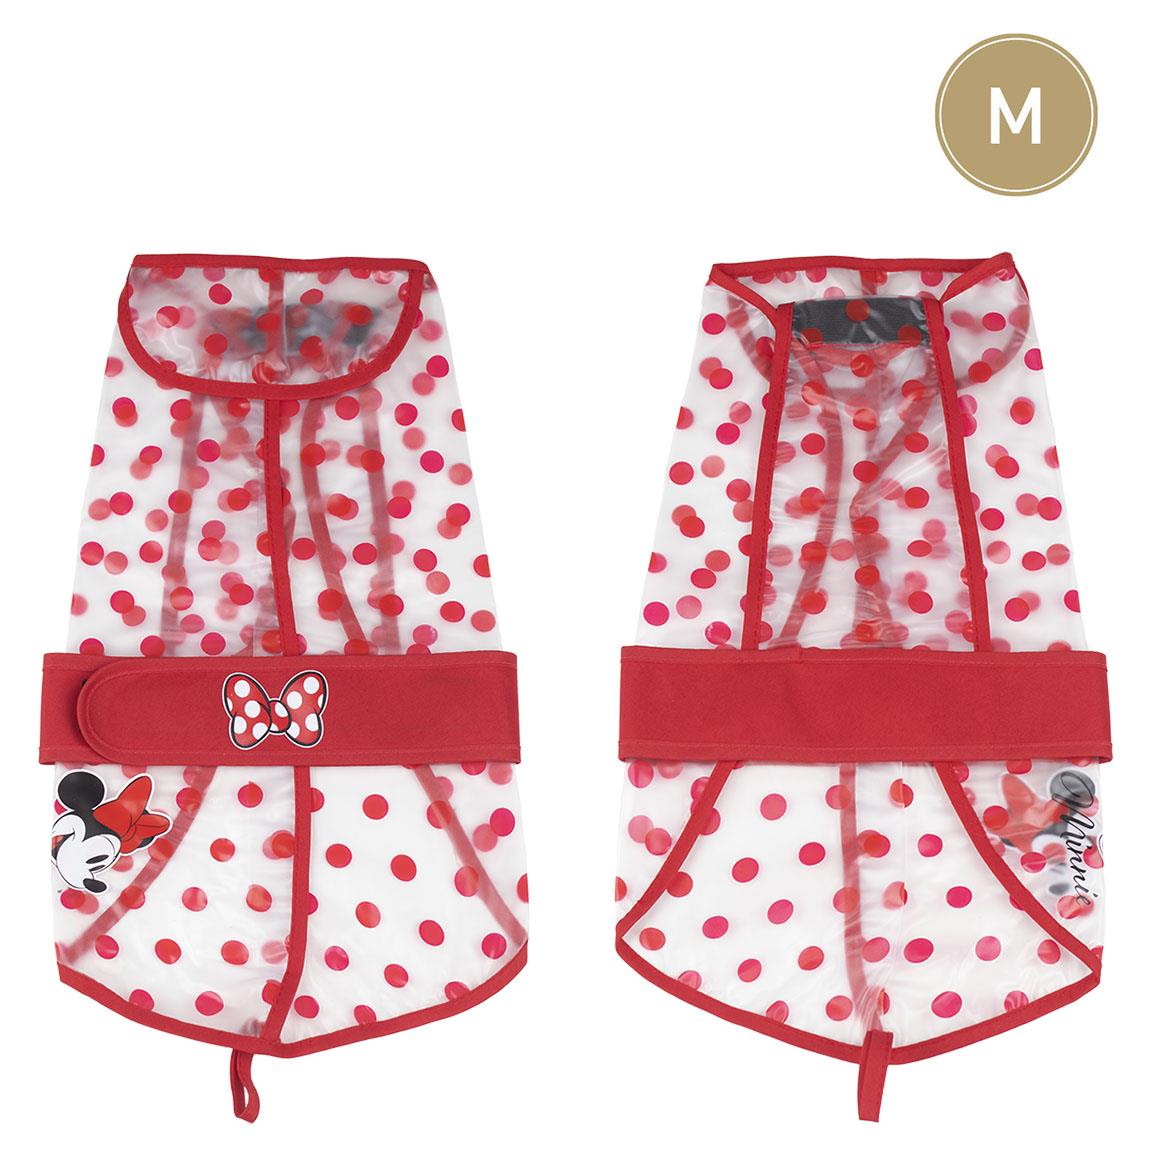 RAINCOAT FOR DOGS M MINNIE